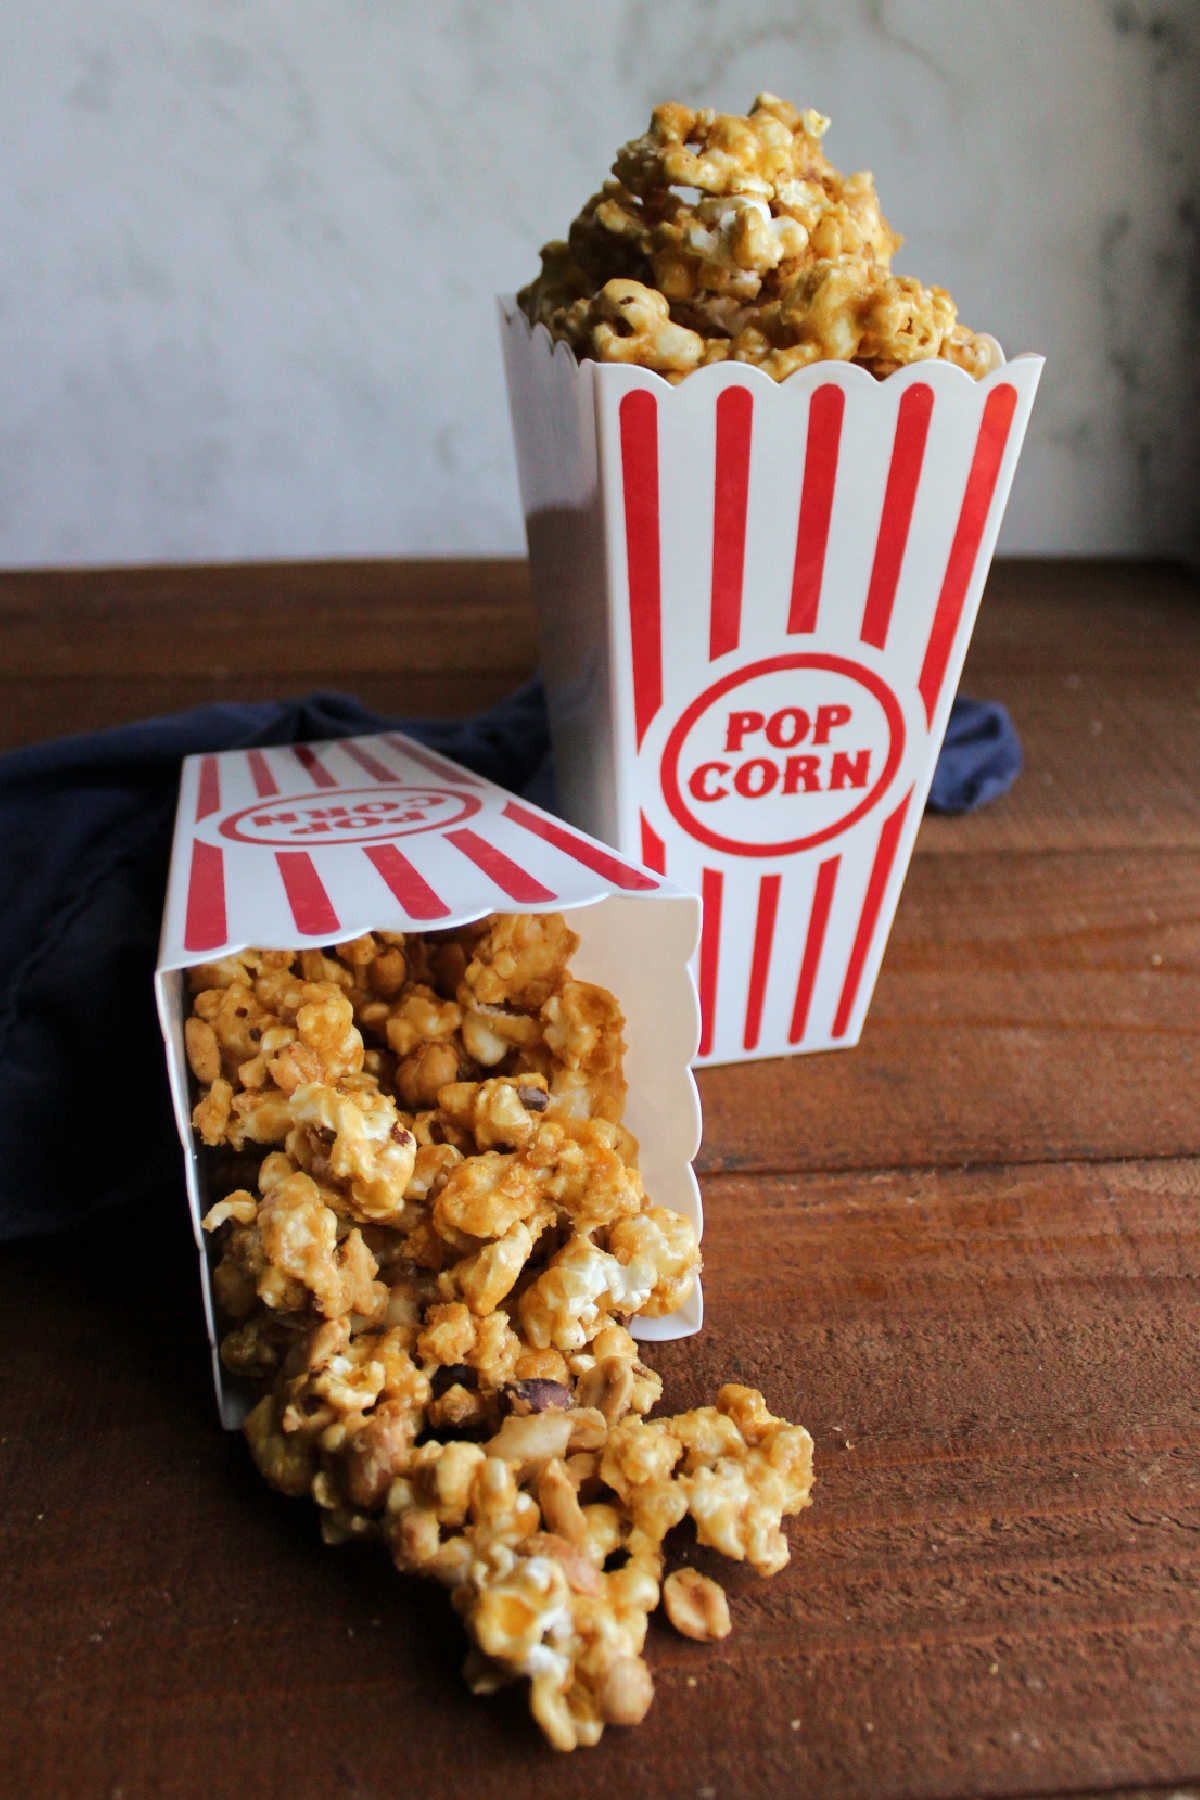 Red and white popcorn containers with caramel coated popcorn, one spilled over.